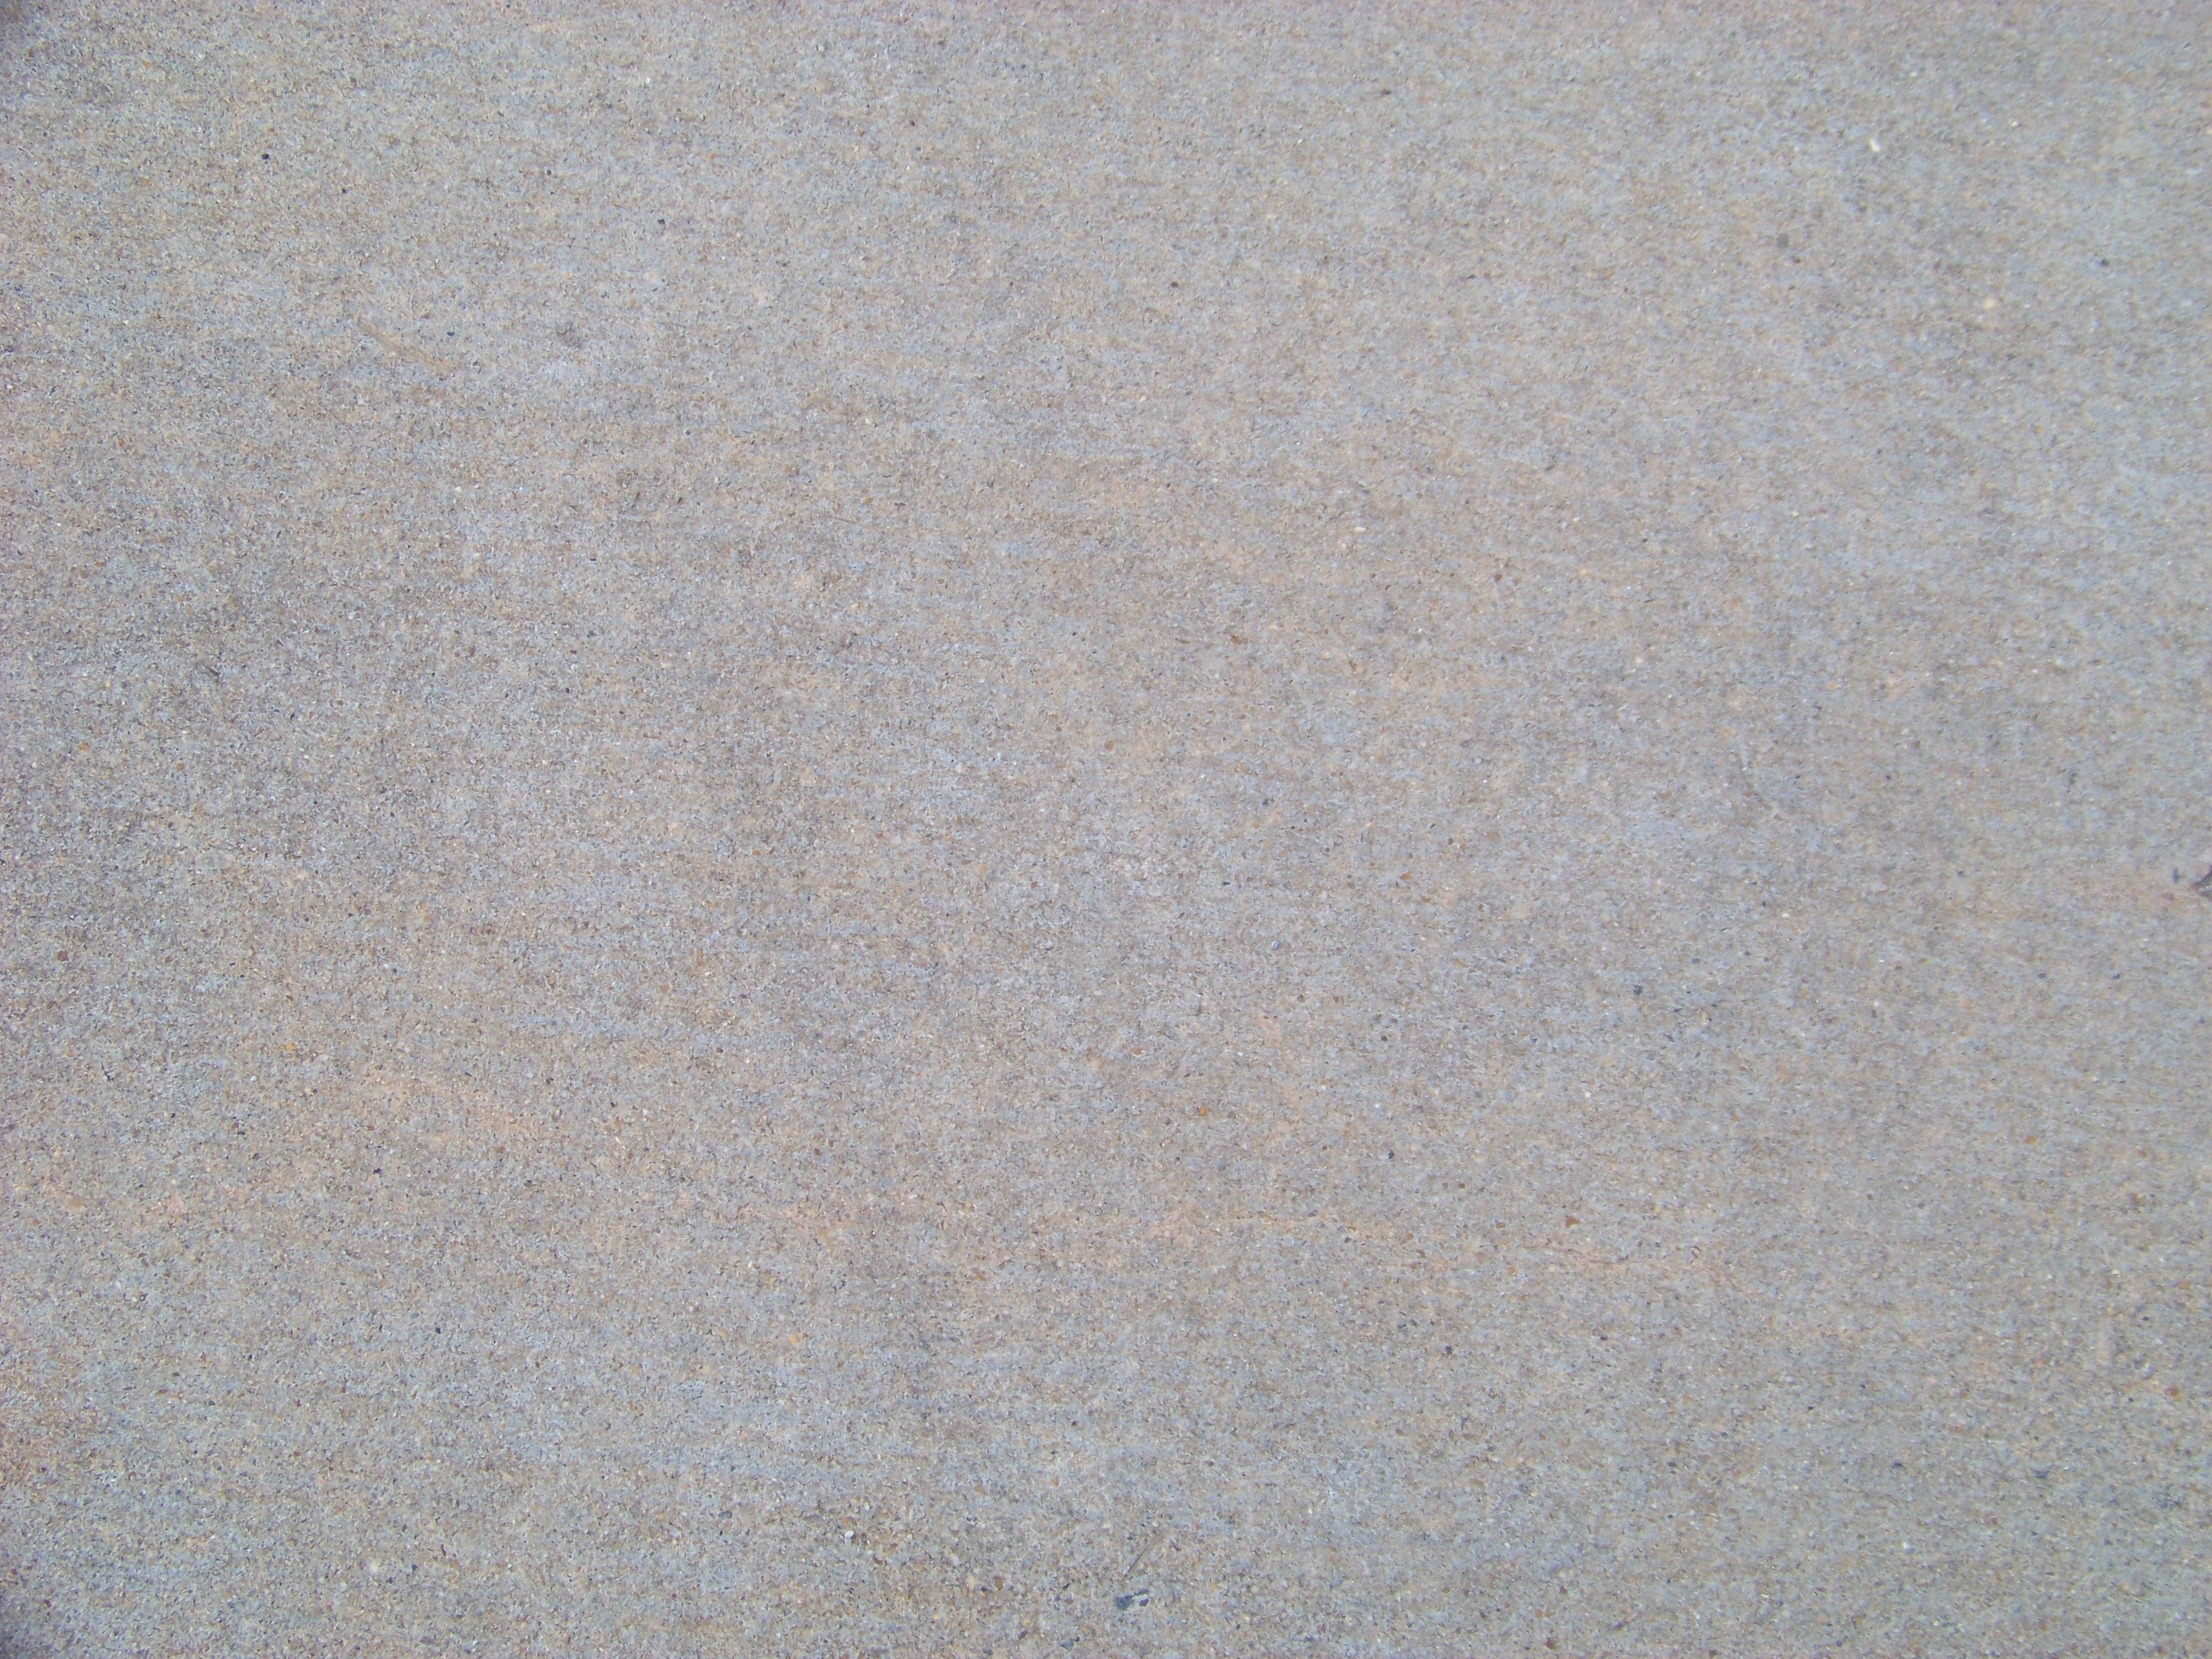 Free Images : structure, texture, floor, wall, stone, asphalt ...